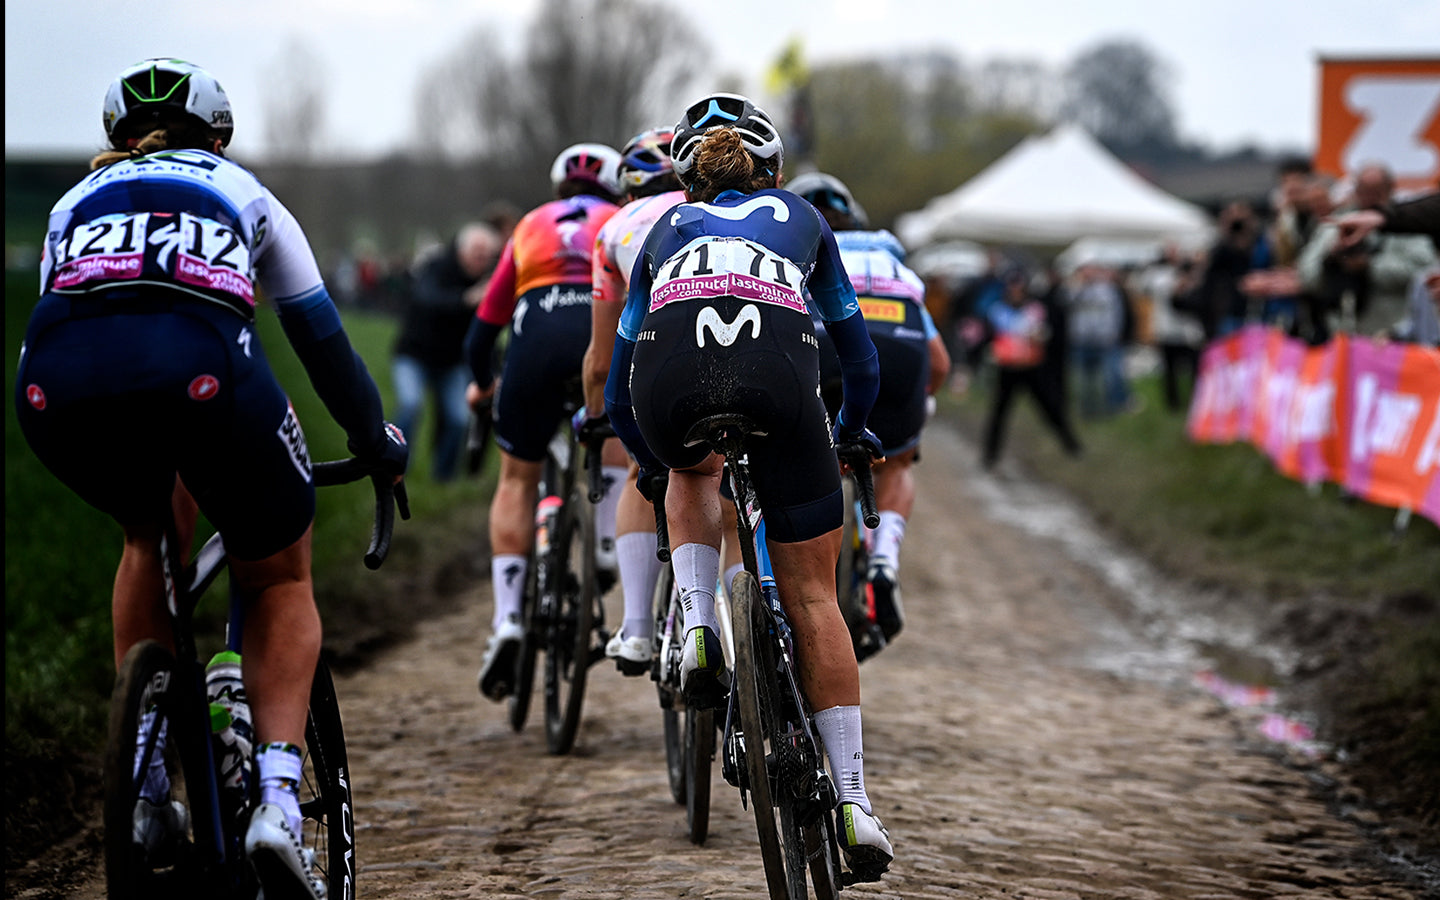 On his back, with the bib number 71, cyclist of the Movistar Team rider of the women's team crossing one of the characteristic pavé zones of the Paris-Roubaix race.